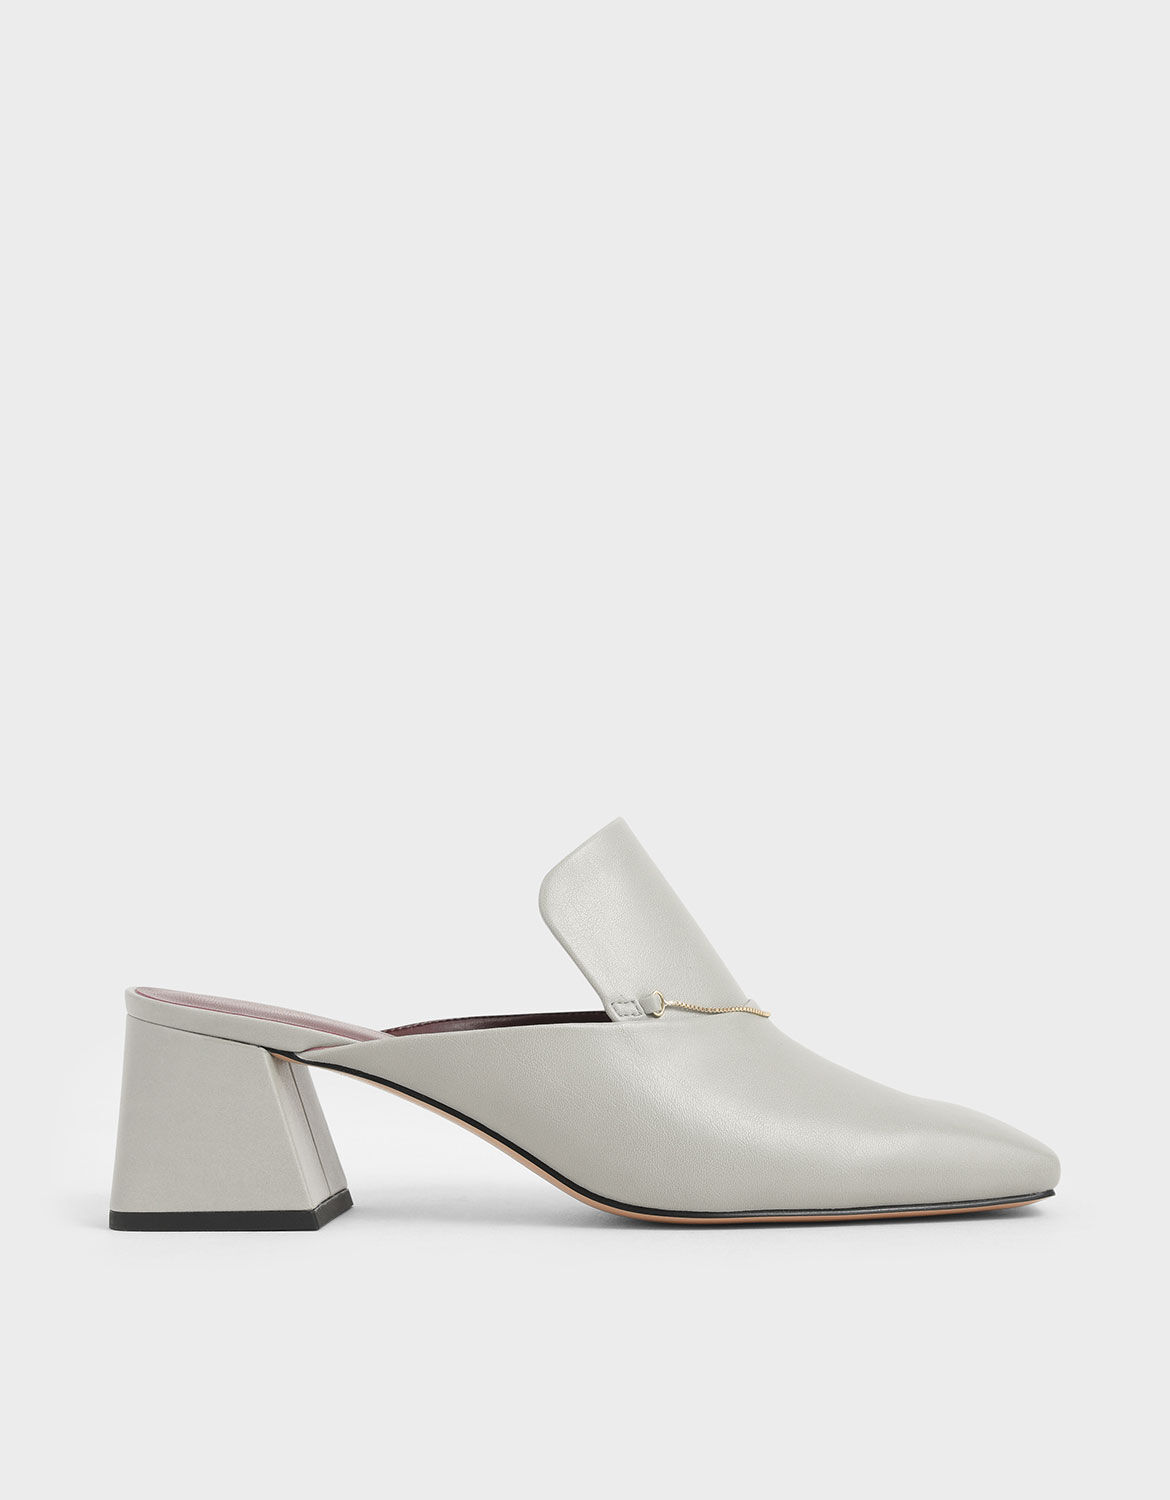 white loafer mules